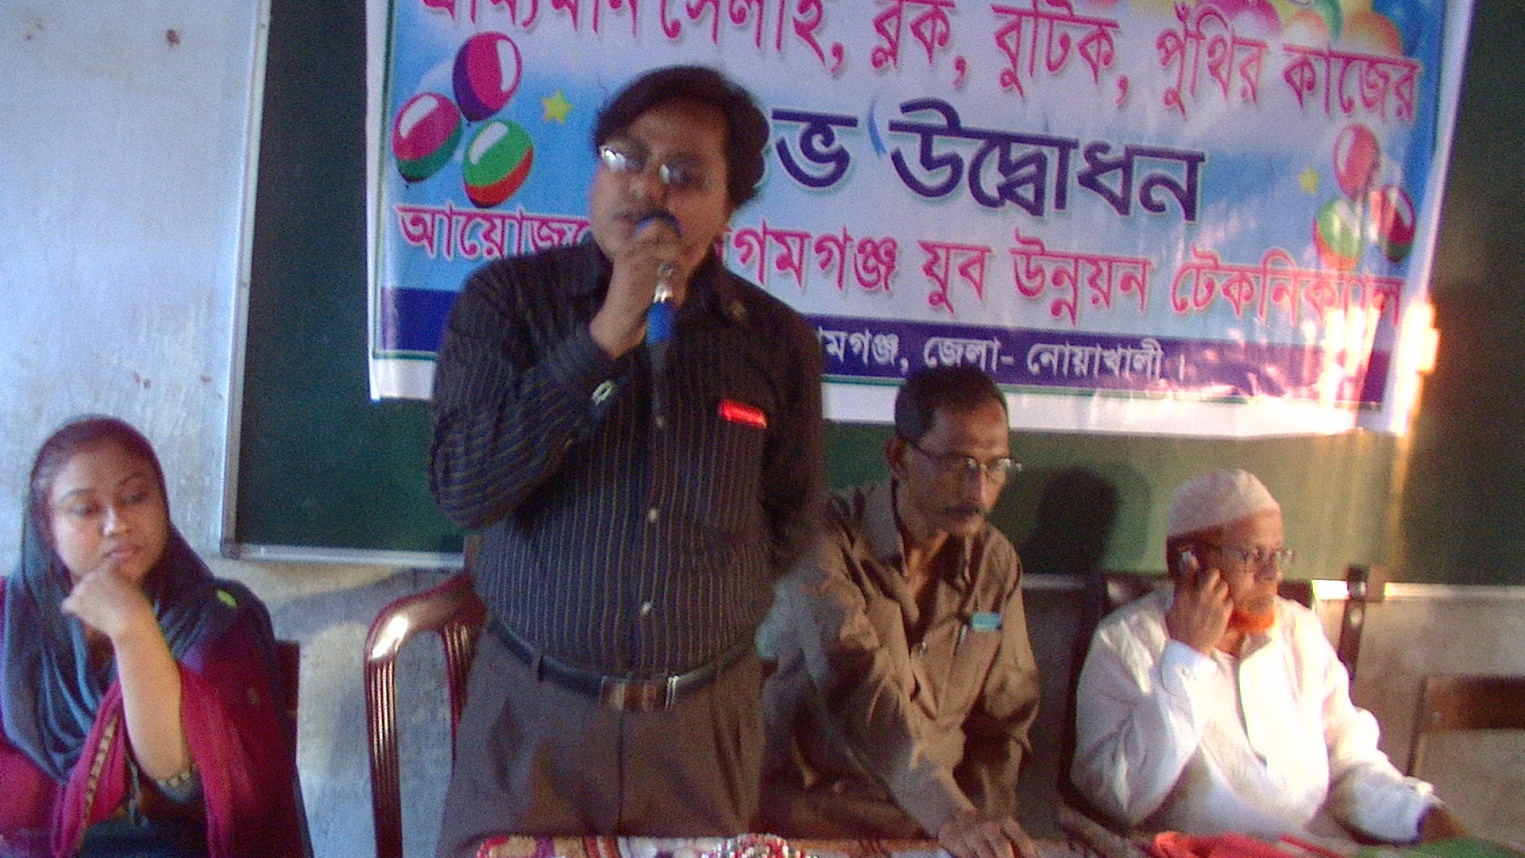 In the picture- Chairman of Begamganj-Sonaimuri Shikkha O Sastha Unnayan Foundation and Principal, Begumganj Technical & Computer Institute Md. Giash Uddin Mithu speaking at the inauguration of the sewing, Block, Buttick boutique course. Former councilor and freedom fighter Abdul Mannan and project co-ordinator Golam Mohi Uddin Nashu were present.